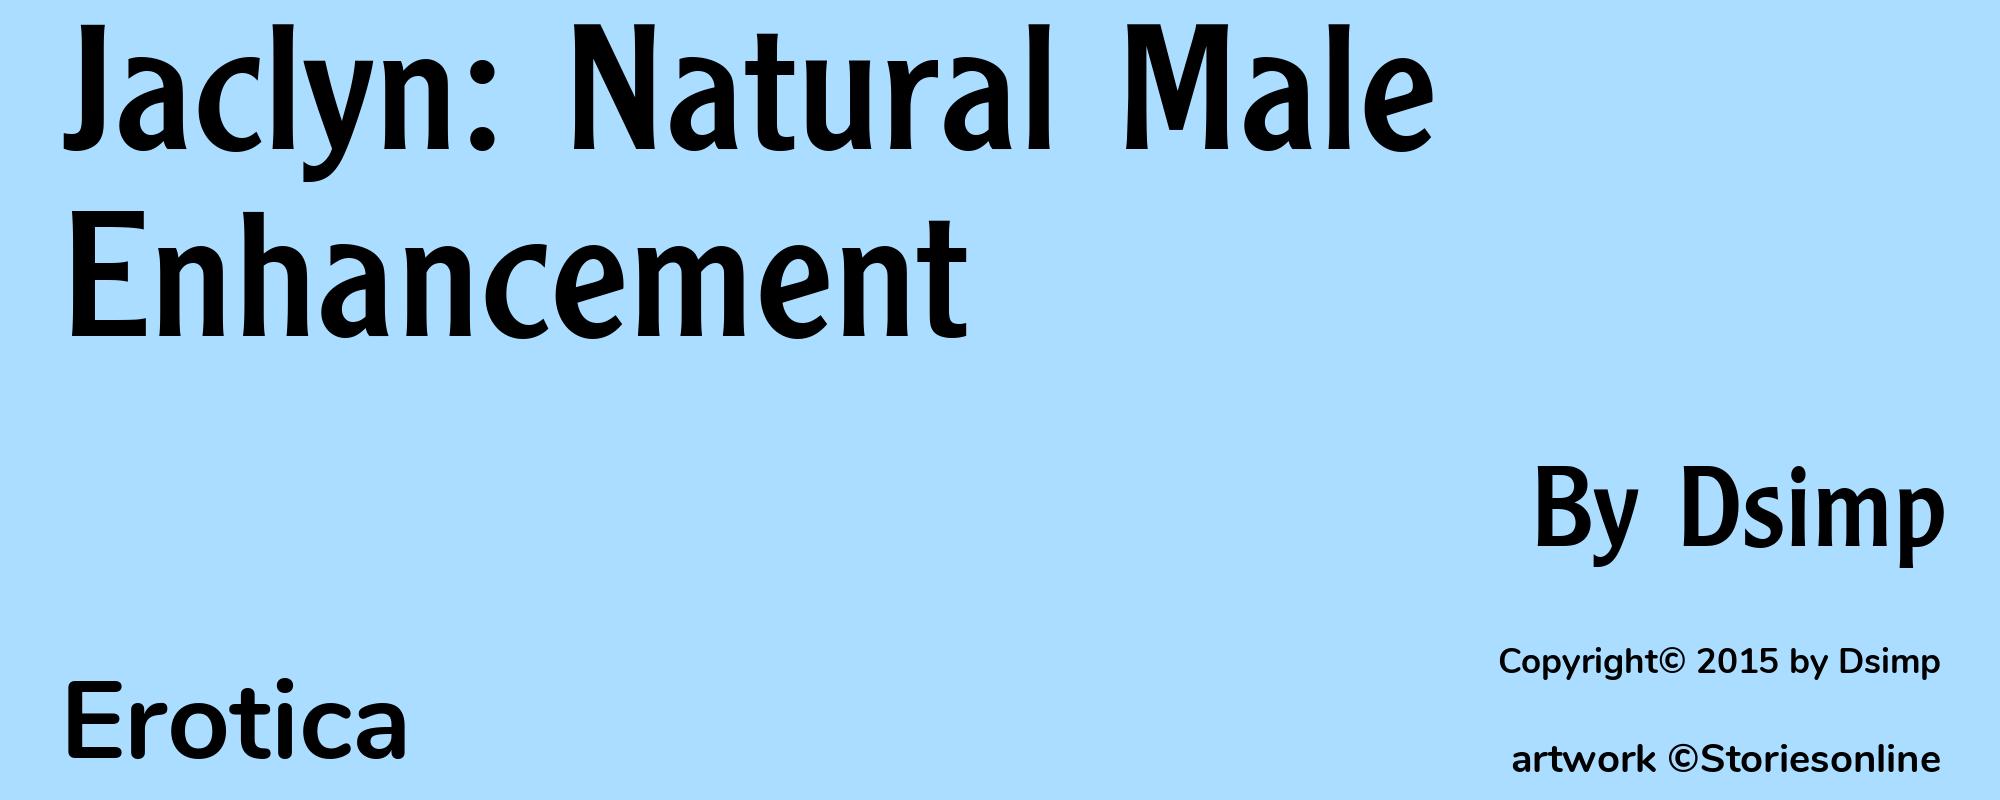 Jaclyn: Natural Male Enhancement - Cover